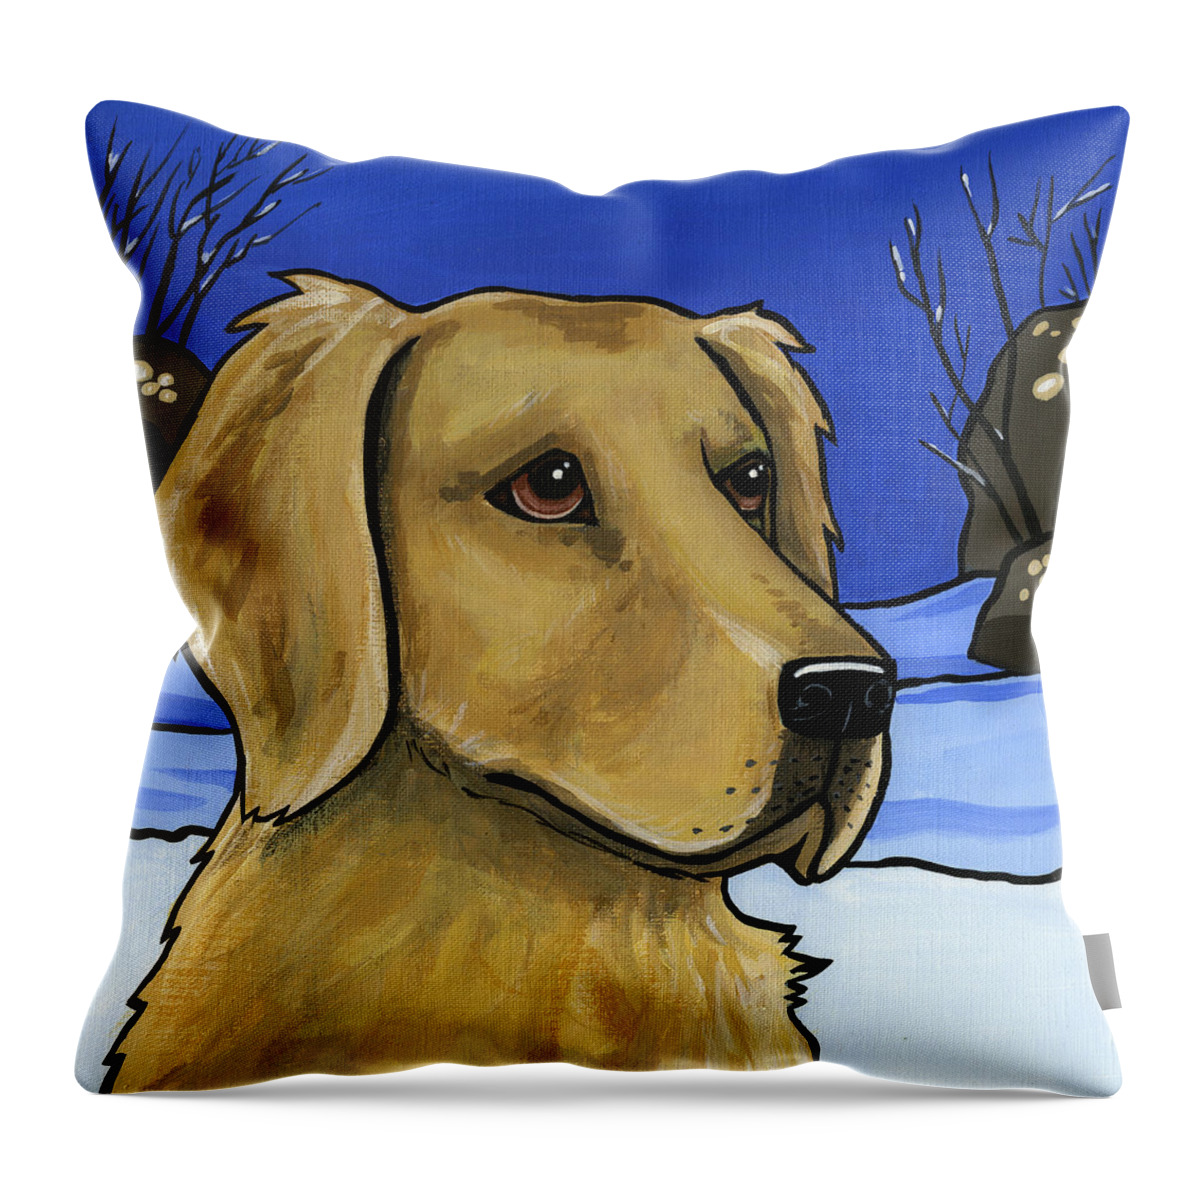 Golden Retriever Throw Pillow featuring the painting Golden Retriever by Leanne Wilkes